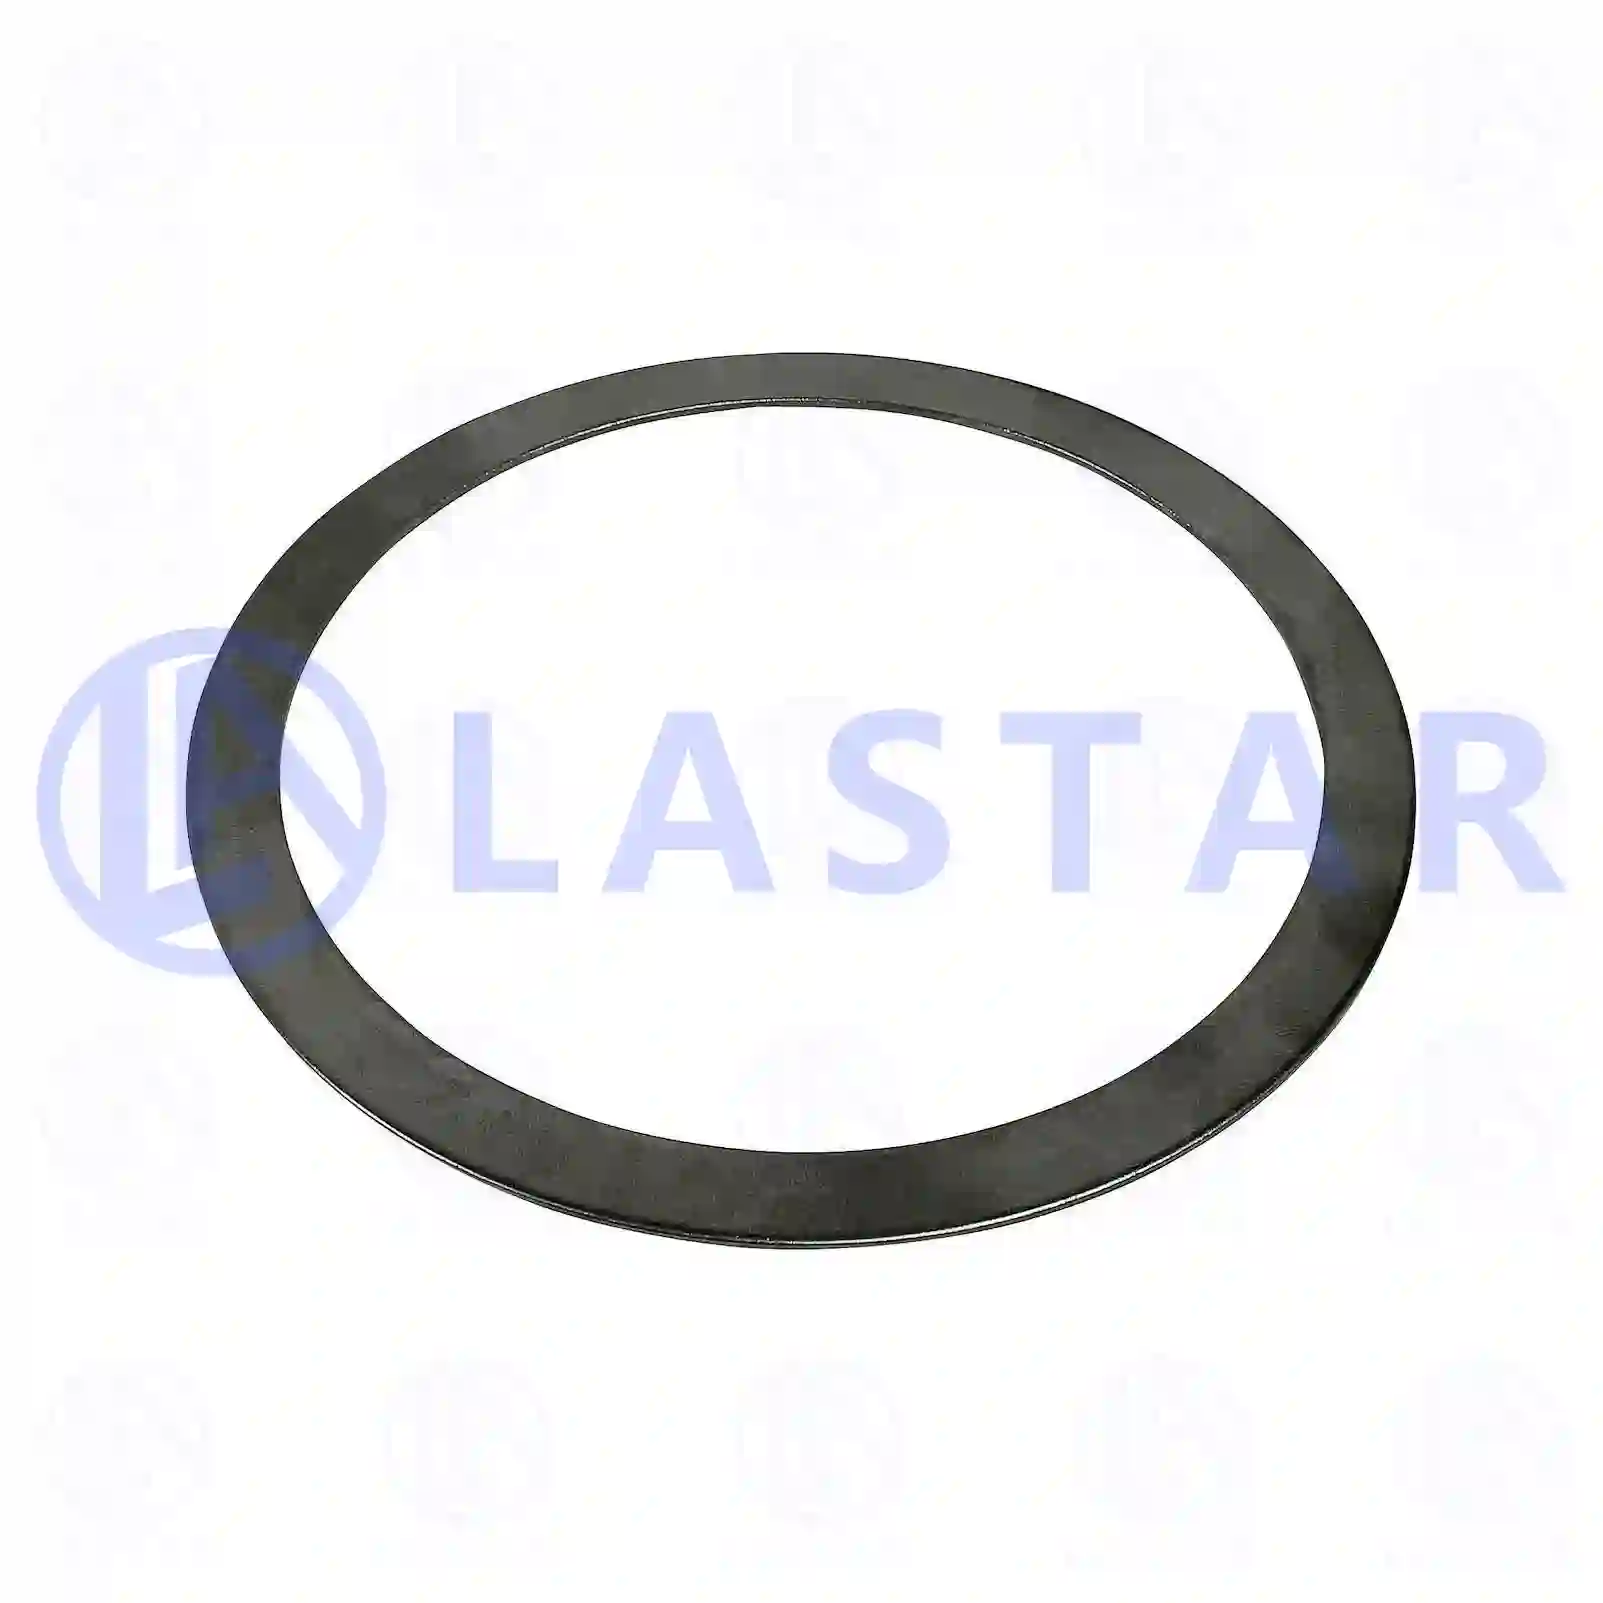 Cover plate, 77726196, 9463560127, 3463560027, 9463560127 ||  77726196 Lastar Spare Part | Truck Spare Parts, Auotomotive Spare Parts Cover plate, 77726196, 9463560127, 3463560027, 9463560127 ||  77726196 Lastar Spare Part | Truck Spare Parts, Auotomotive Spare Parts